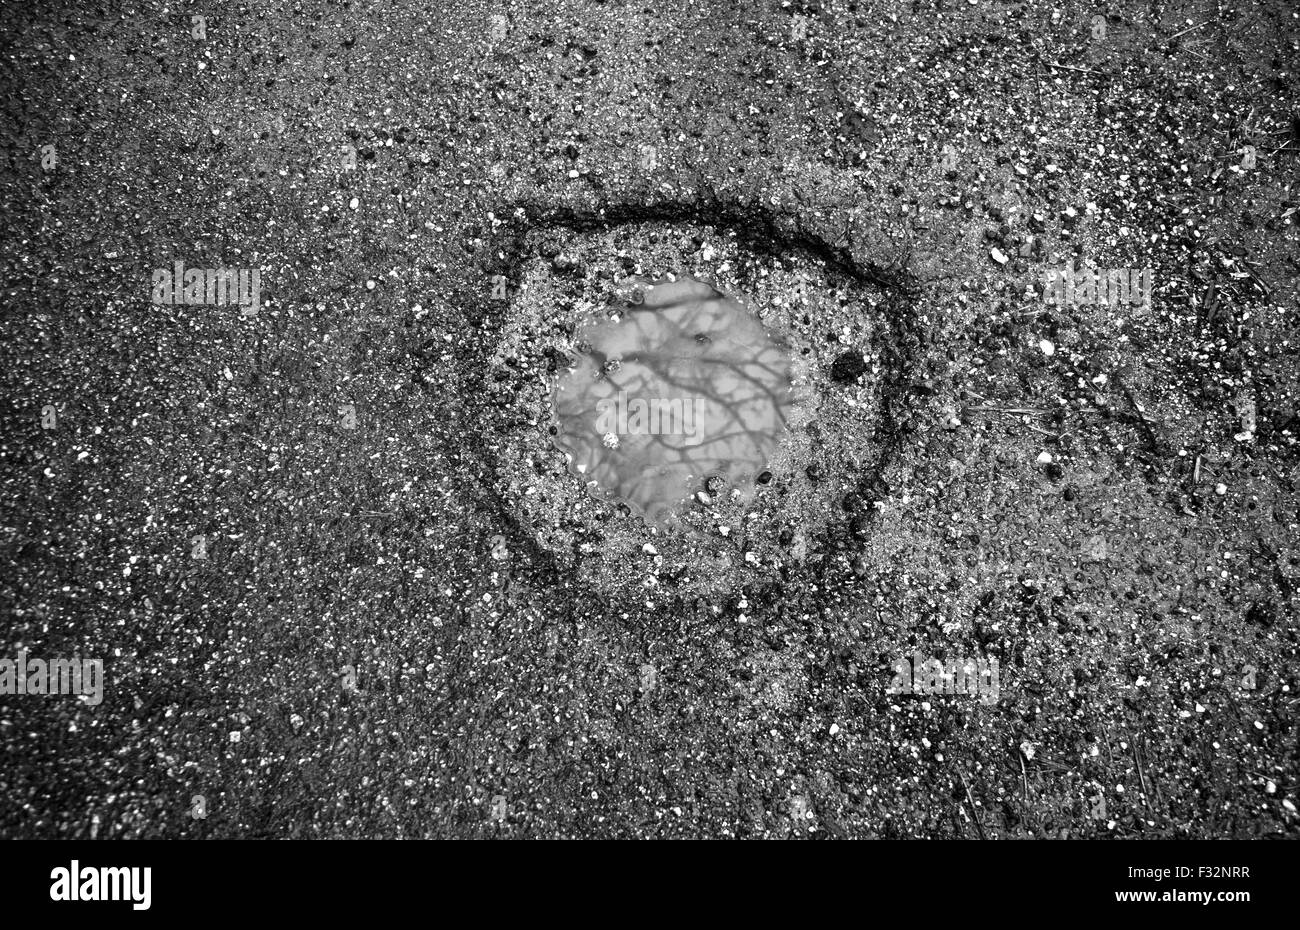 Pothole in the road full of rain water, black and white. Stock Photo